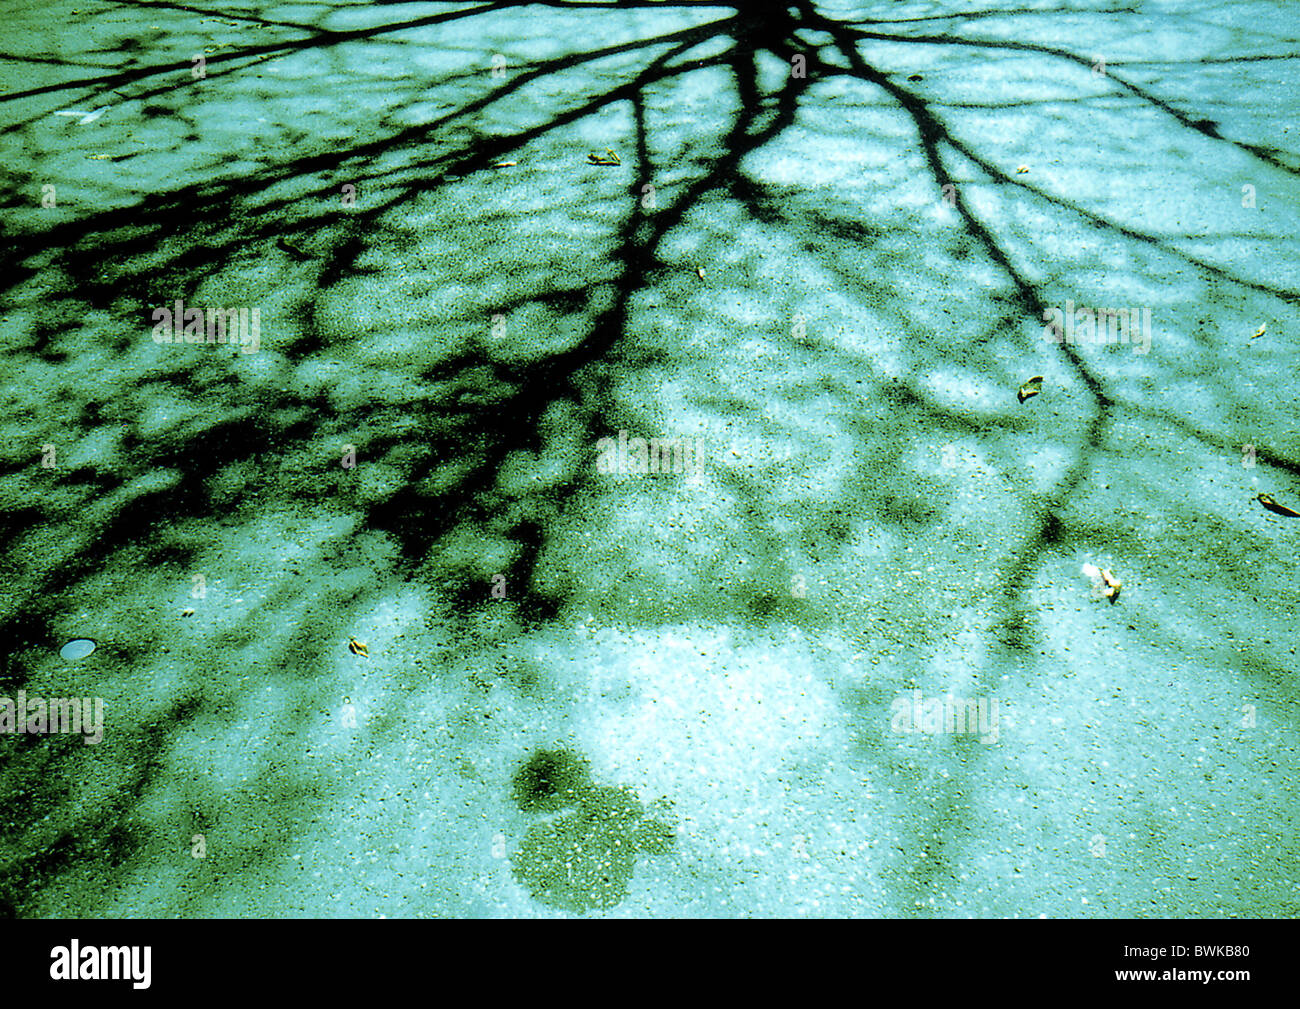 ground bottom place space asphalt tree branches branches knots shades shadow throw lomo Stock Photo